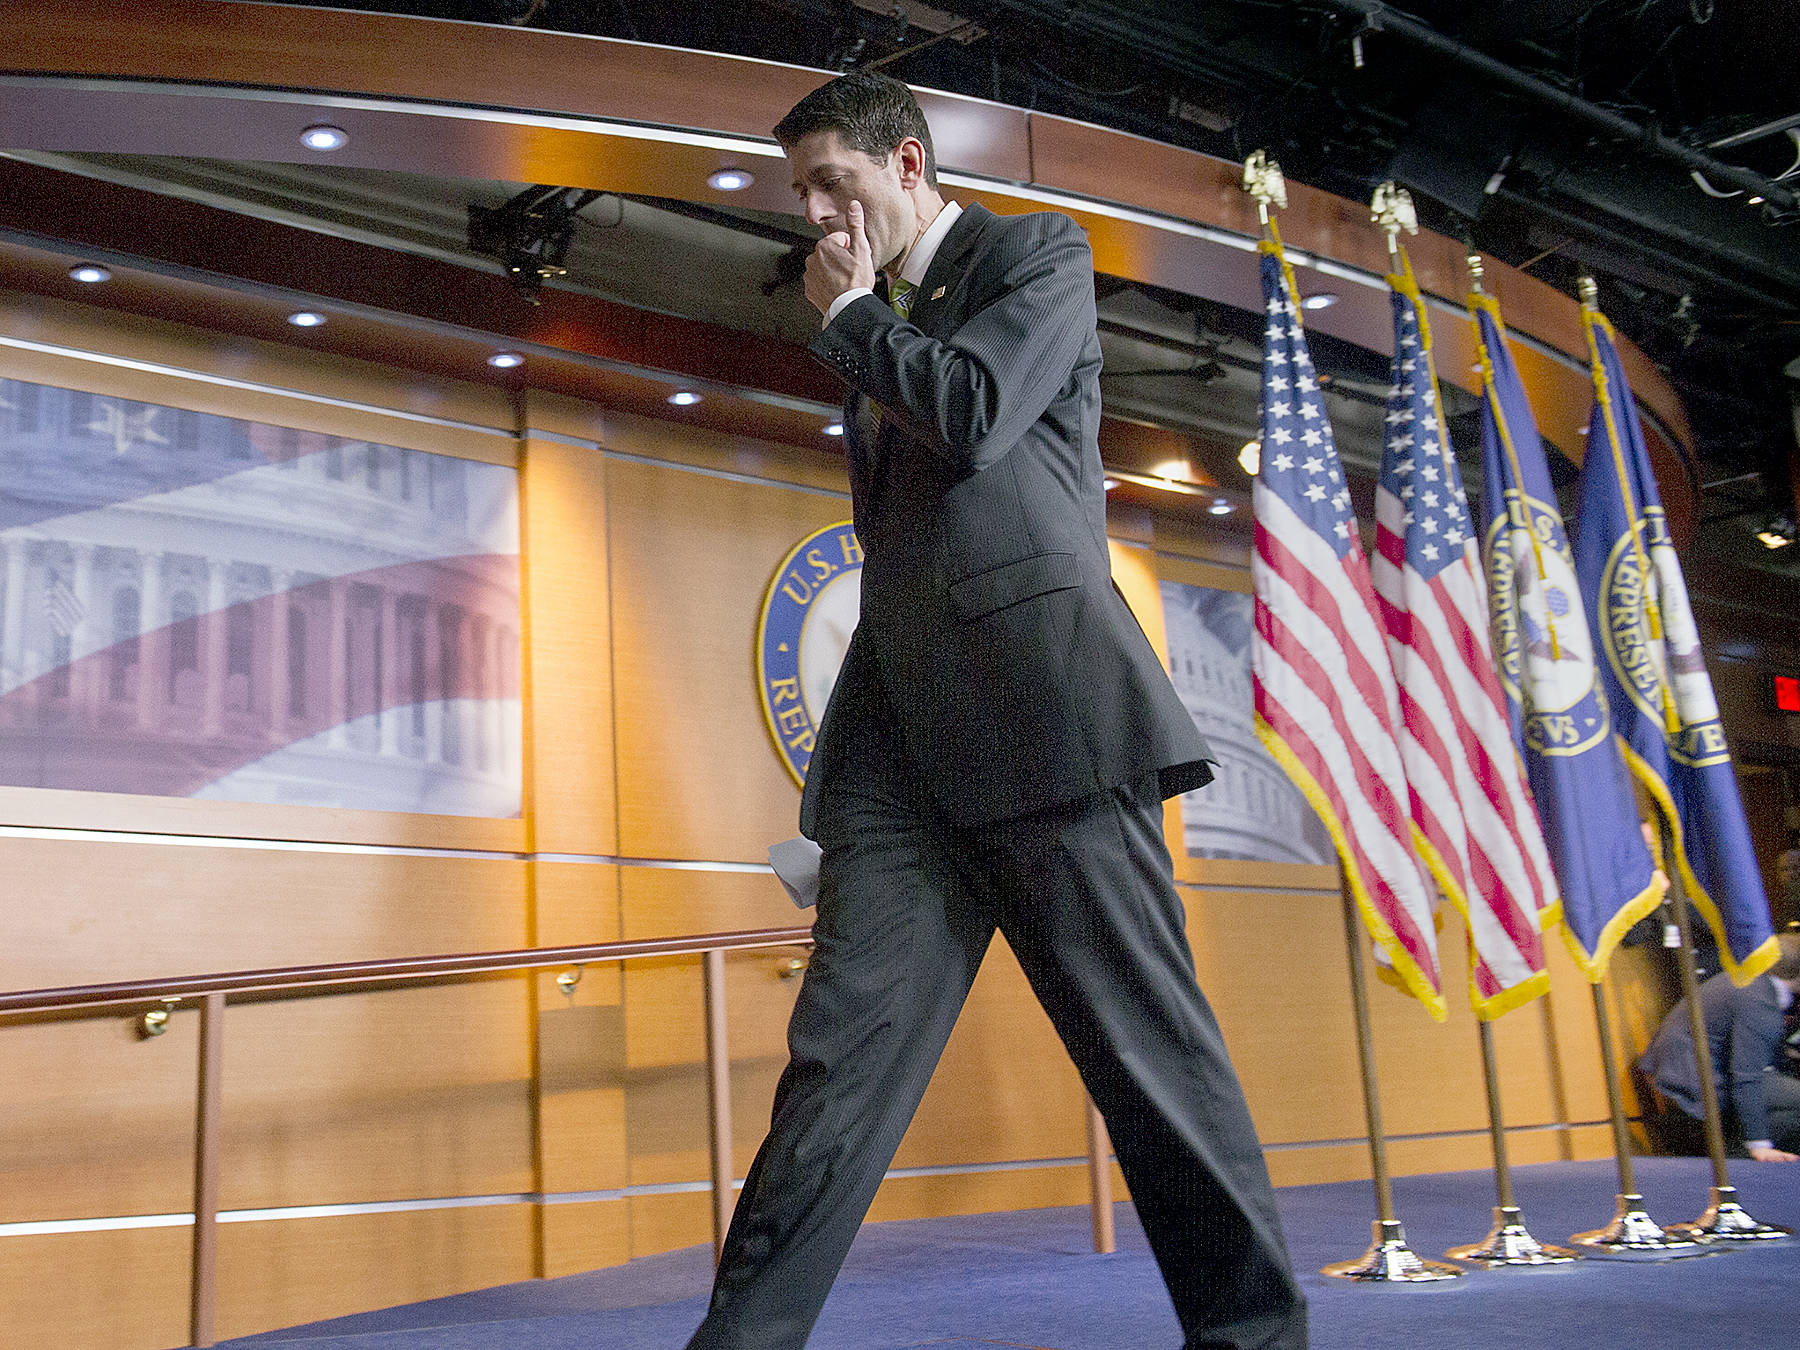 House Speaker Paul Ryan of Wis. leaves after telling the news media that he has pulled the health care overhaul bill, Friday, March 24, 2017, on Capitol Hill in Washington. Speaking about the failure of health care bill: Ryan said: ‘We came really close today, but we came up short.’ (AP Photo/Cliff Owen)